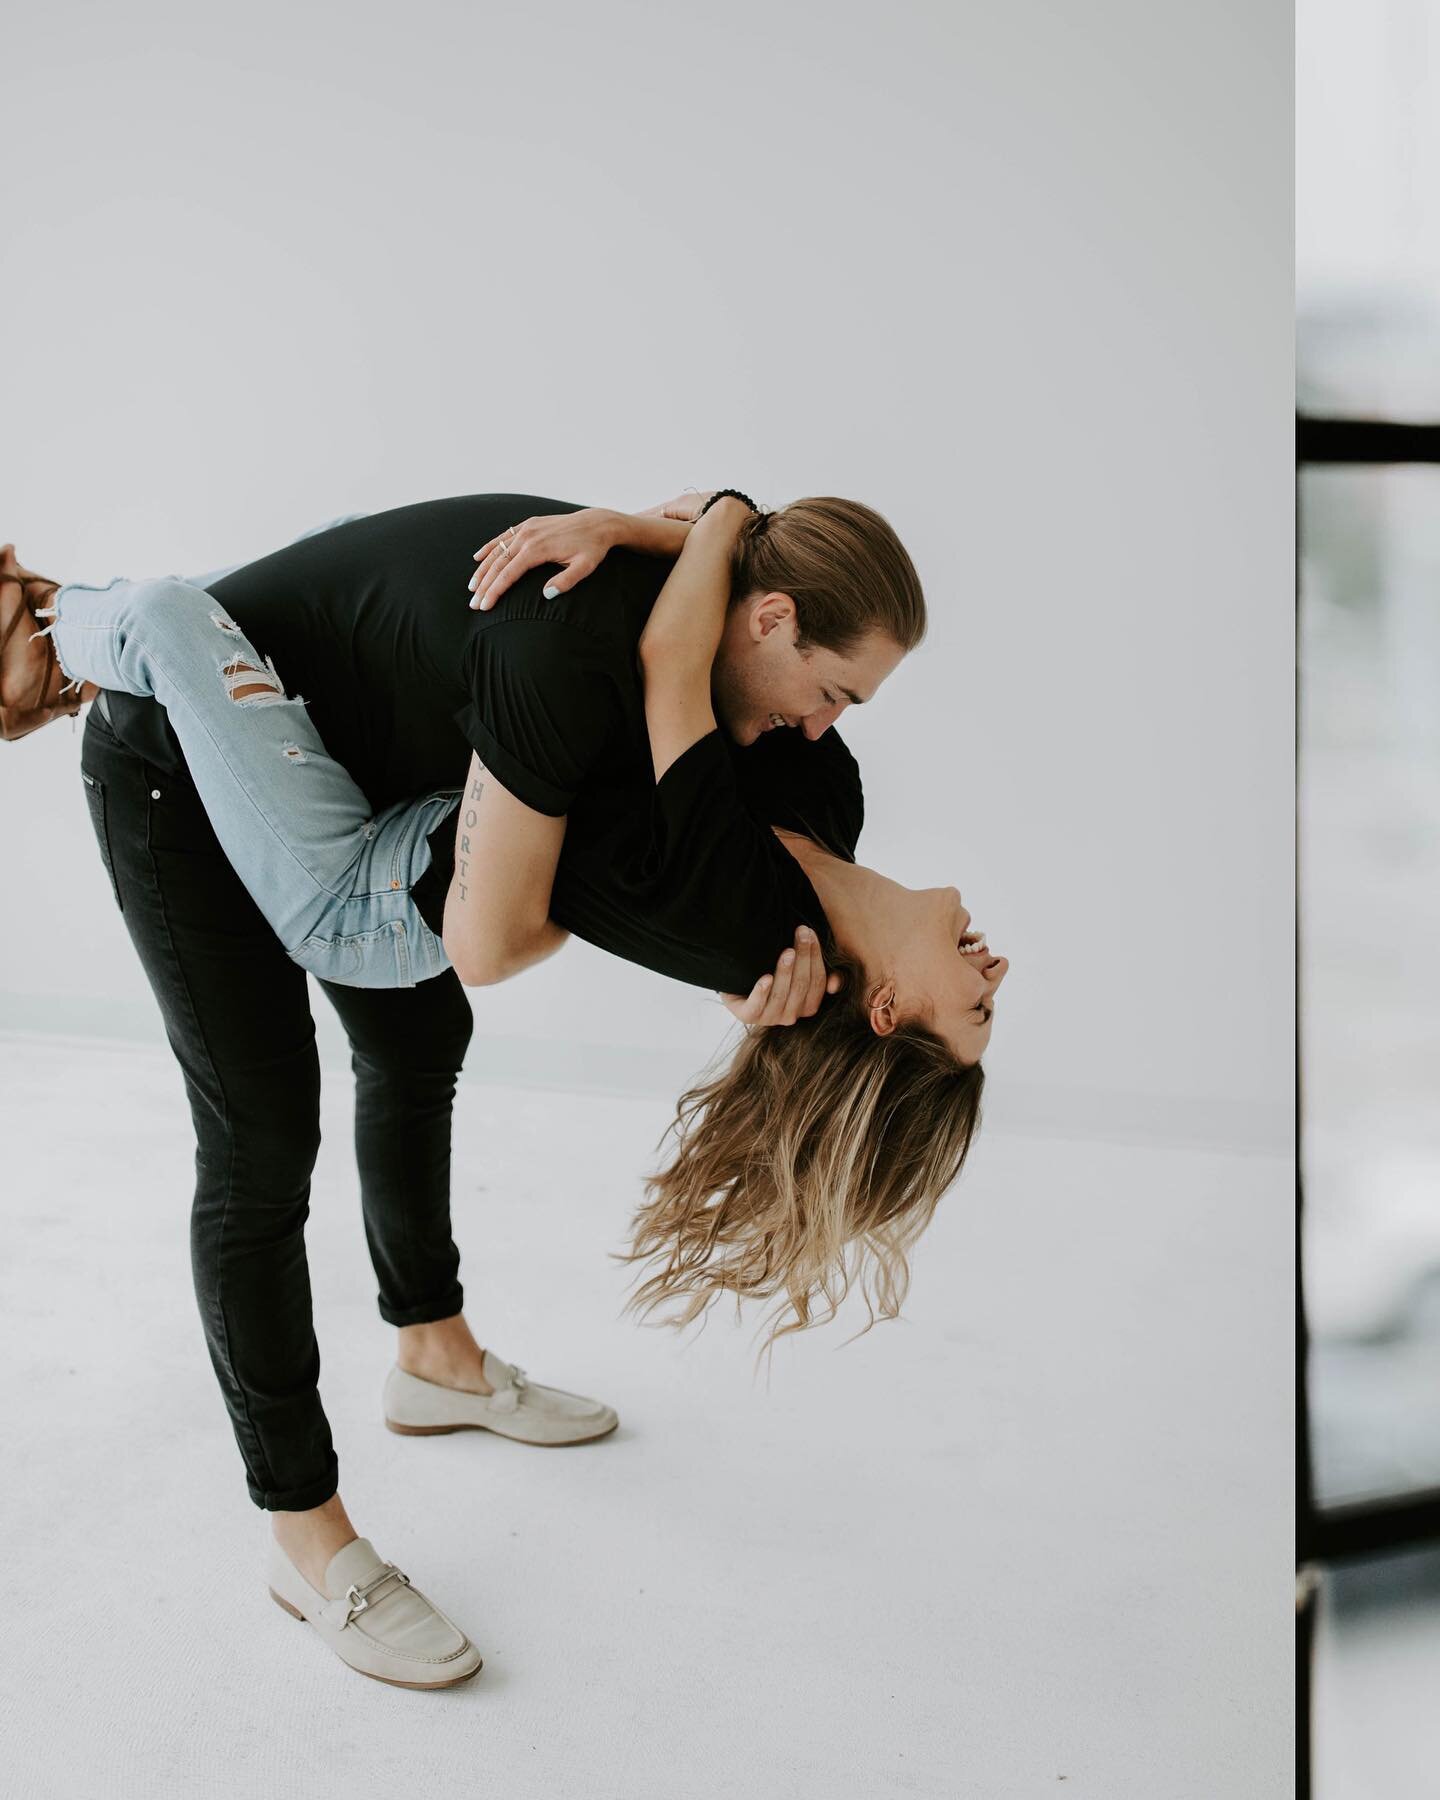 Obsessing over this cute couples session by @keeleyjoyphotos &mdash; thanks for stopping by! ✨

#YYC #calgary #yycphotostudio #yycstudio #yycmodel #yycstudiorental #calgaryphotostudio #calgarystudio #calgarymodel #calgarystudiorental #albertaphotostu